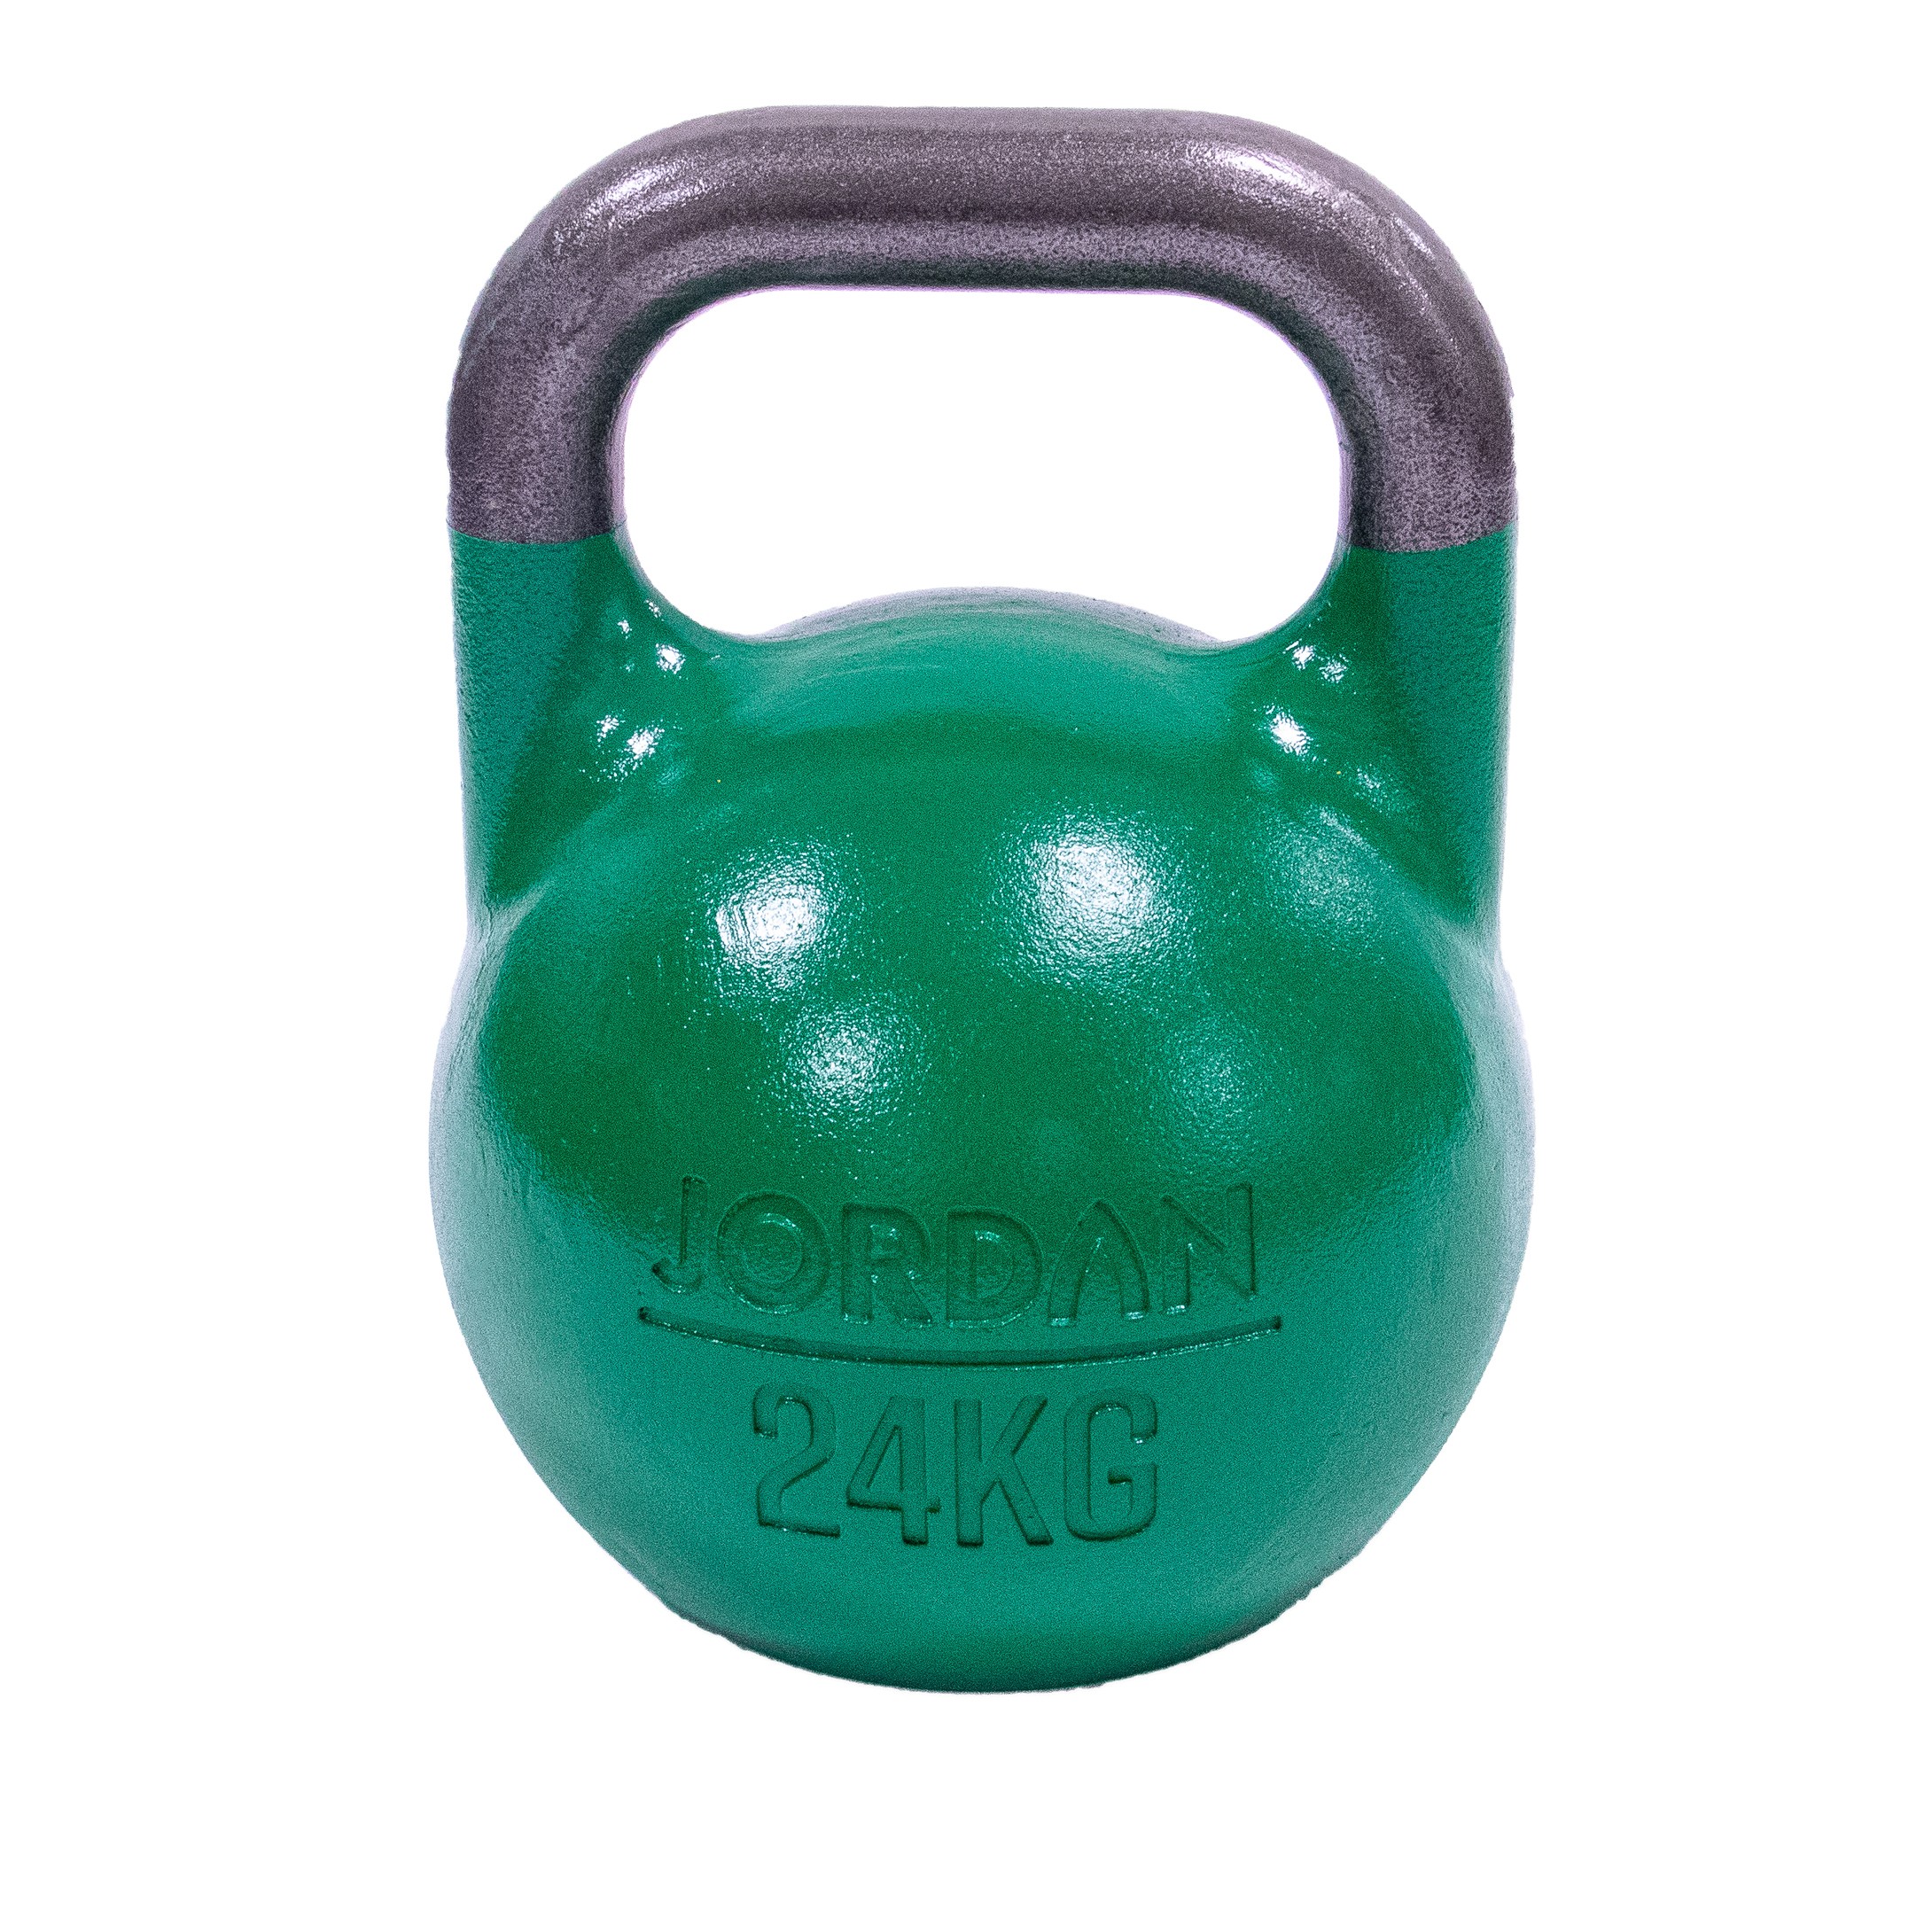 24kg Competition kettlebell - Green kopen? Ga voor | AStepAhead - Competition - AStepAhead